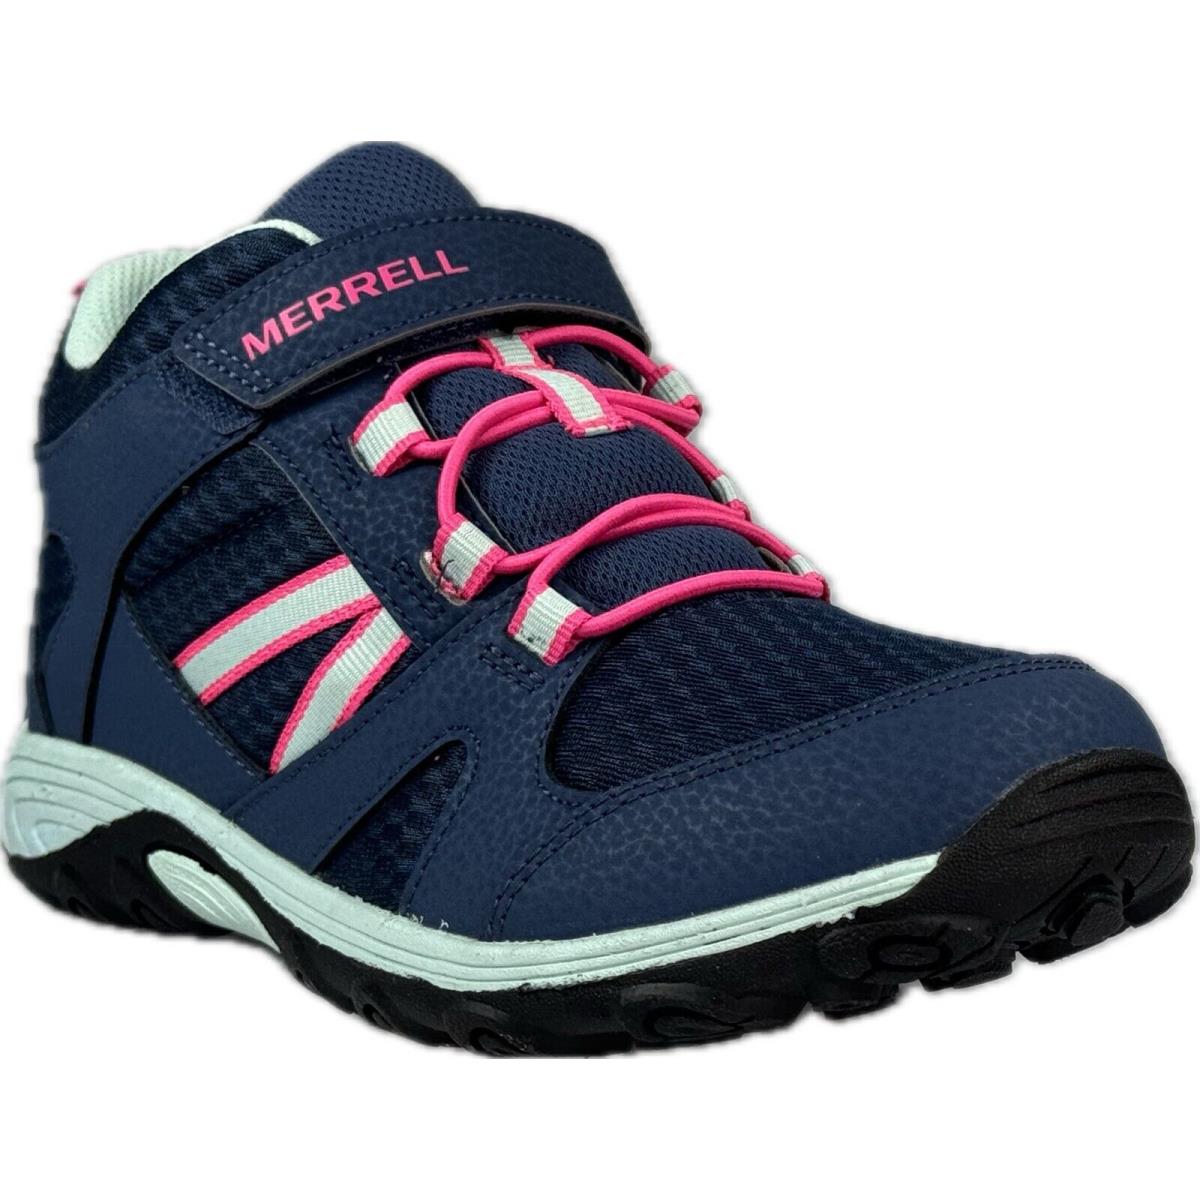 Merrell M-outback Mid Navy Sneakers Girl`s 5.5 Wms 7.5 MK162249